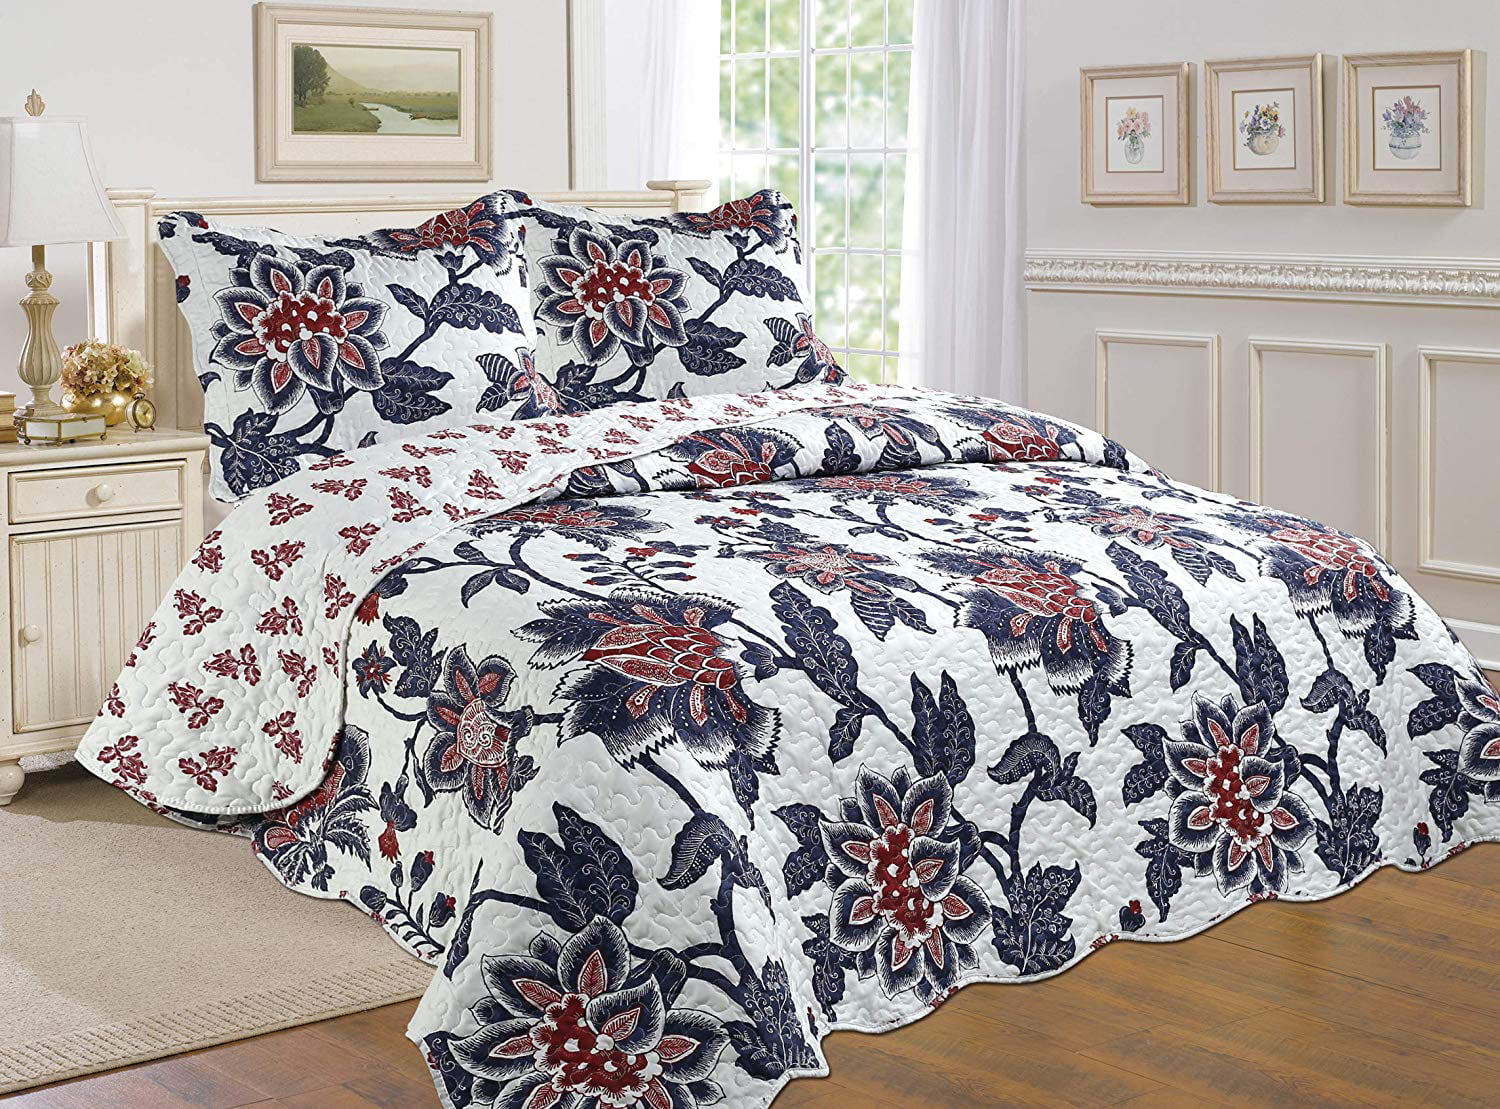 Details about   Mk Home 3pc King/California King Bedspread Quilted Print Floral White Brown Gree 